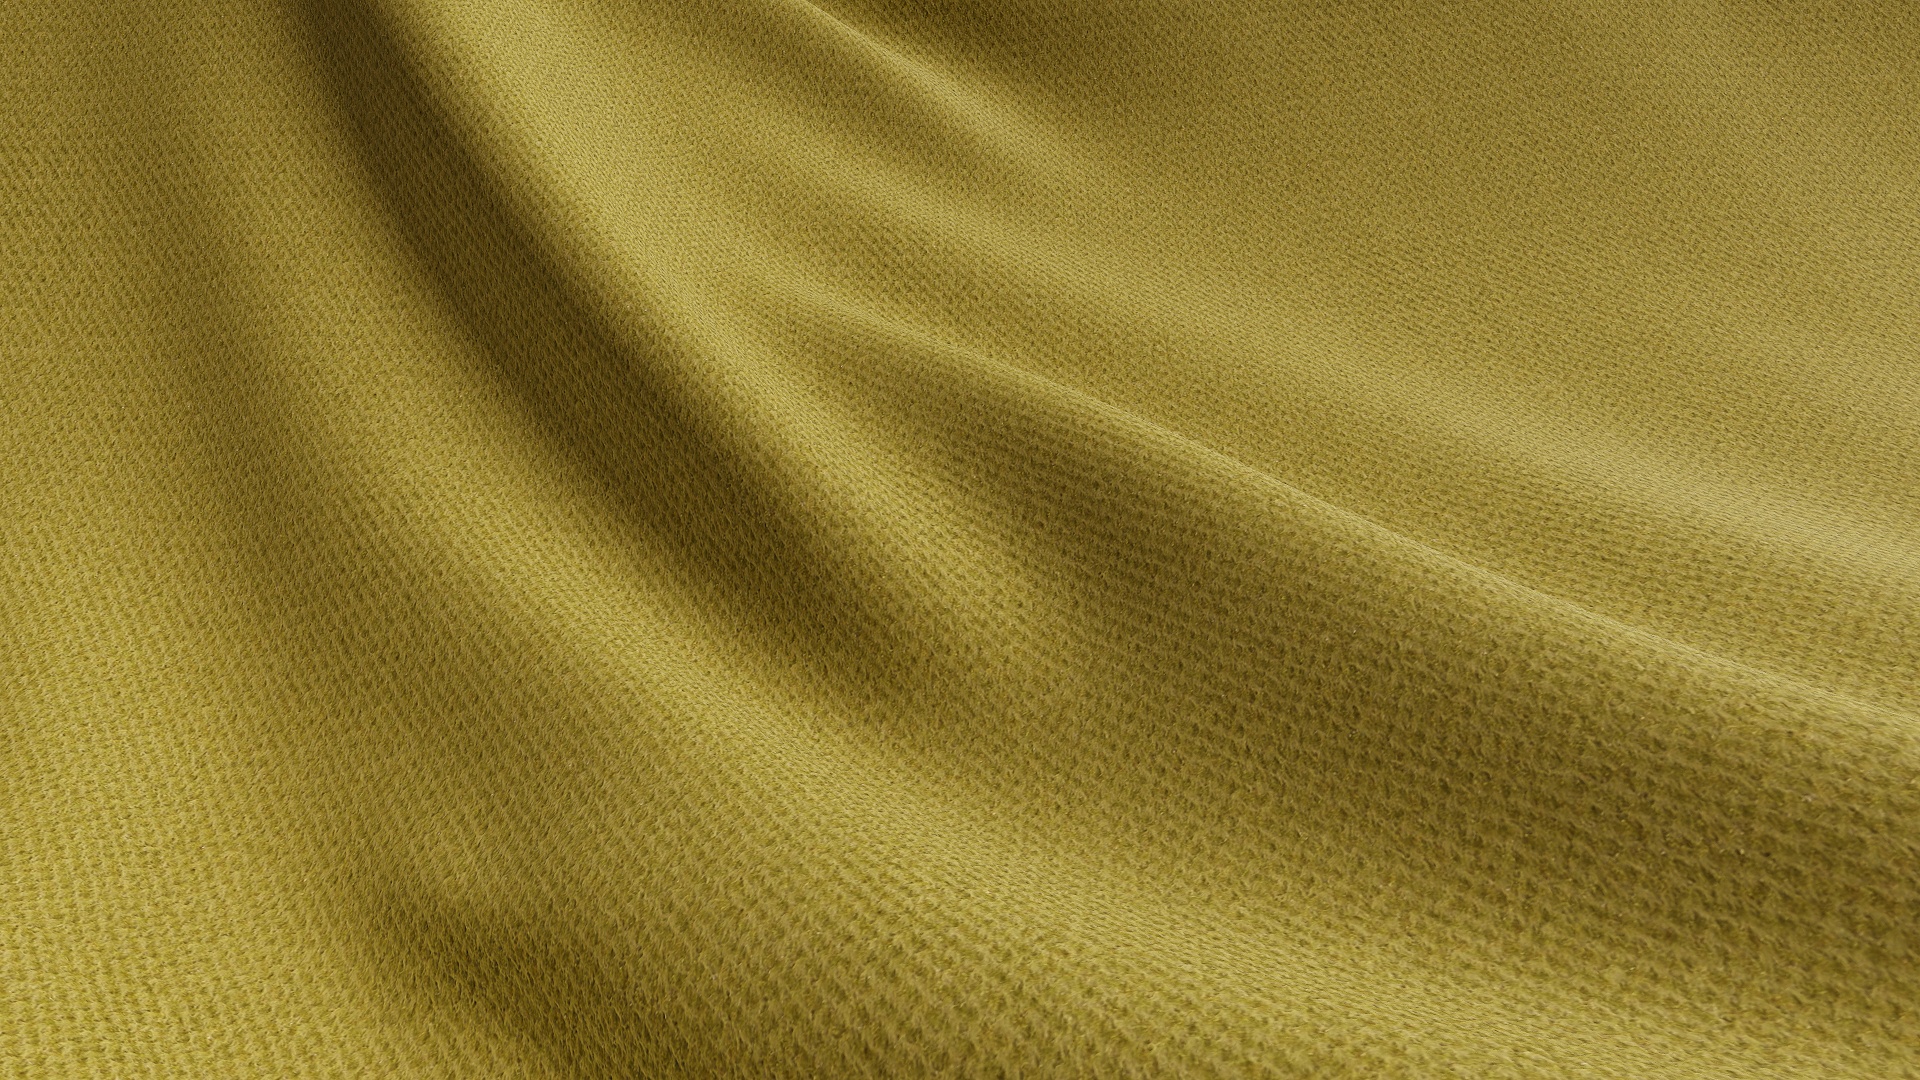 Soft Synthetic Fabric - download free seamless texture and Substance ...